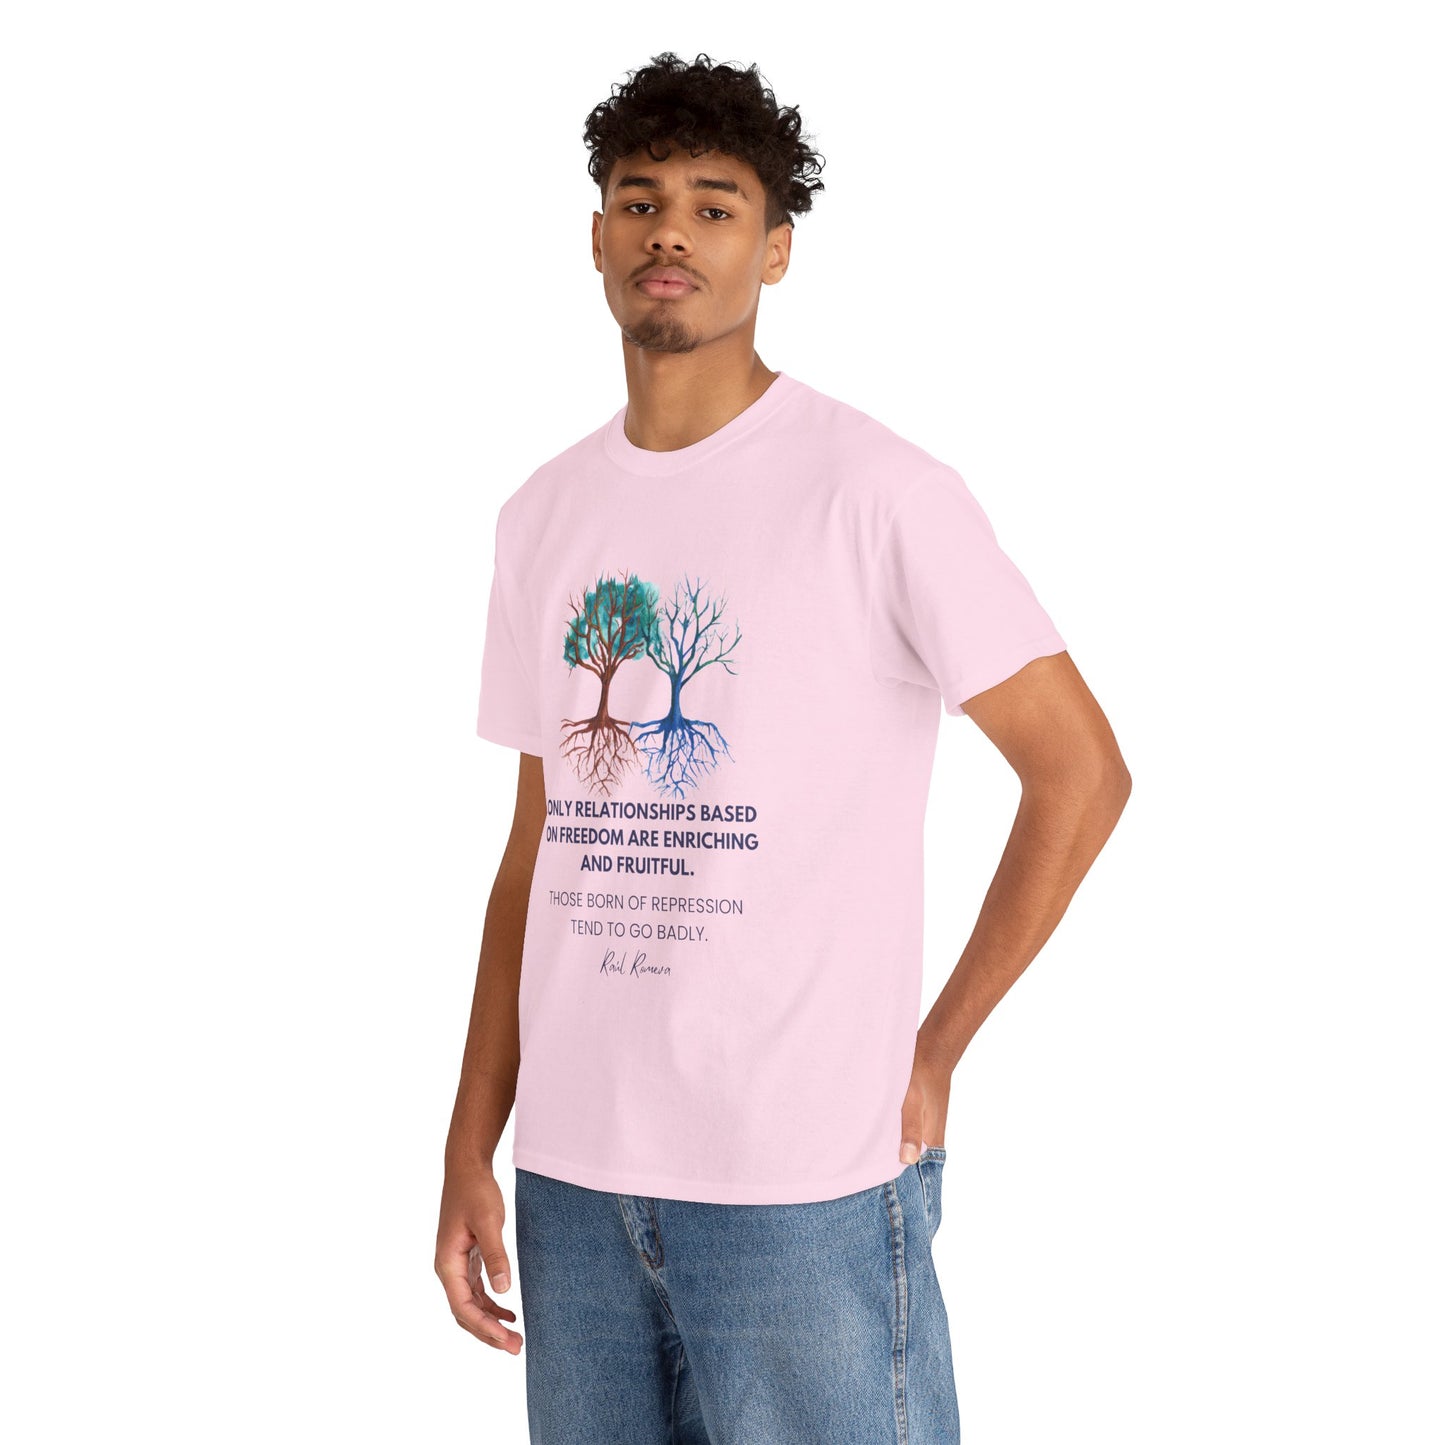 The Free Spirit T-Shirt: Authentic Connections"Freedom... enriching and fruitful" Raul Romeva